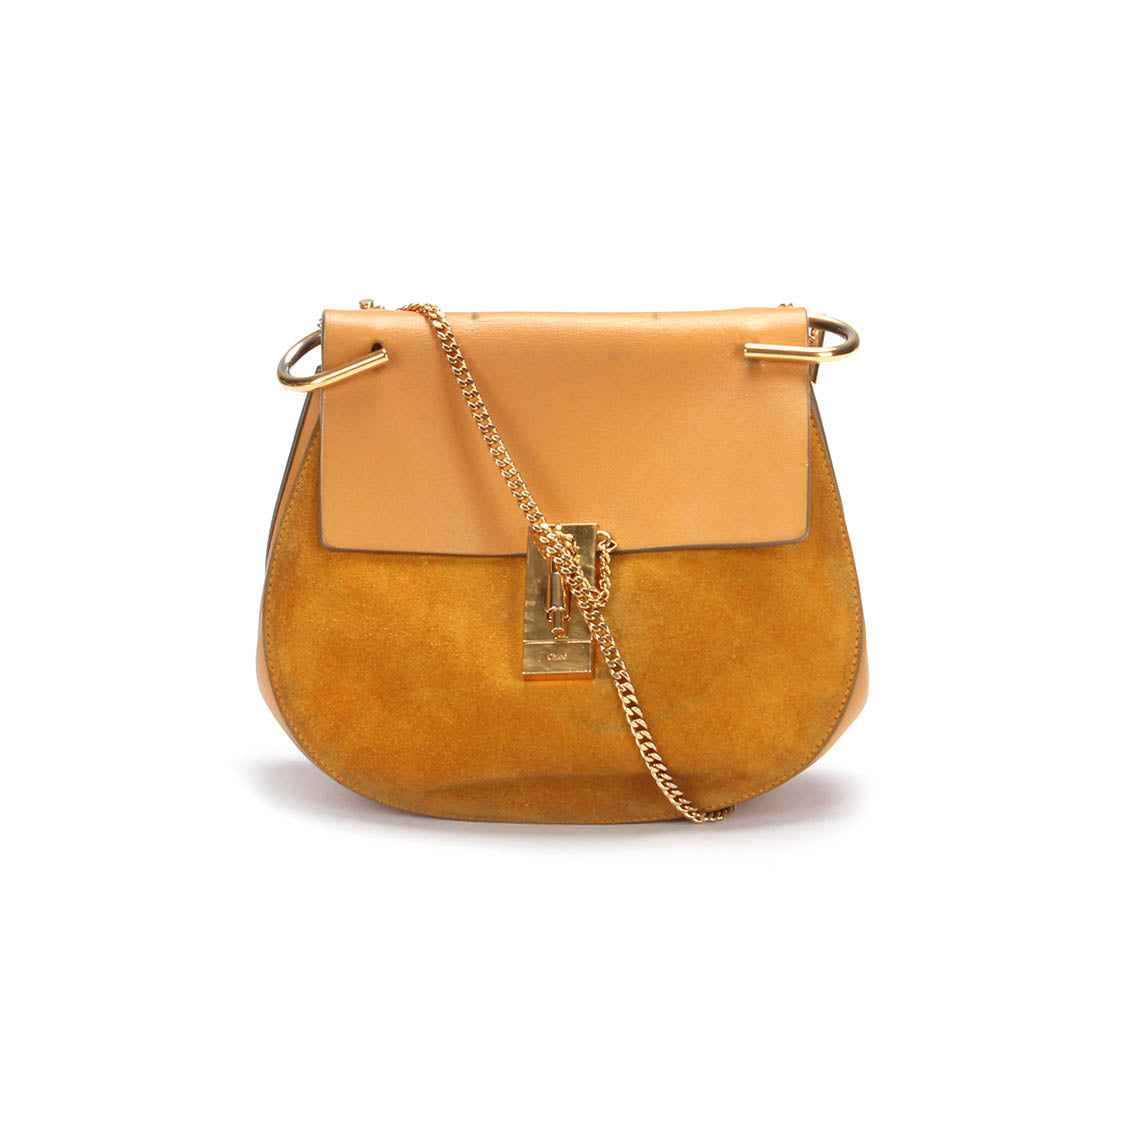 Suede Leather Drew Bag